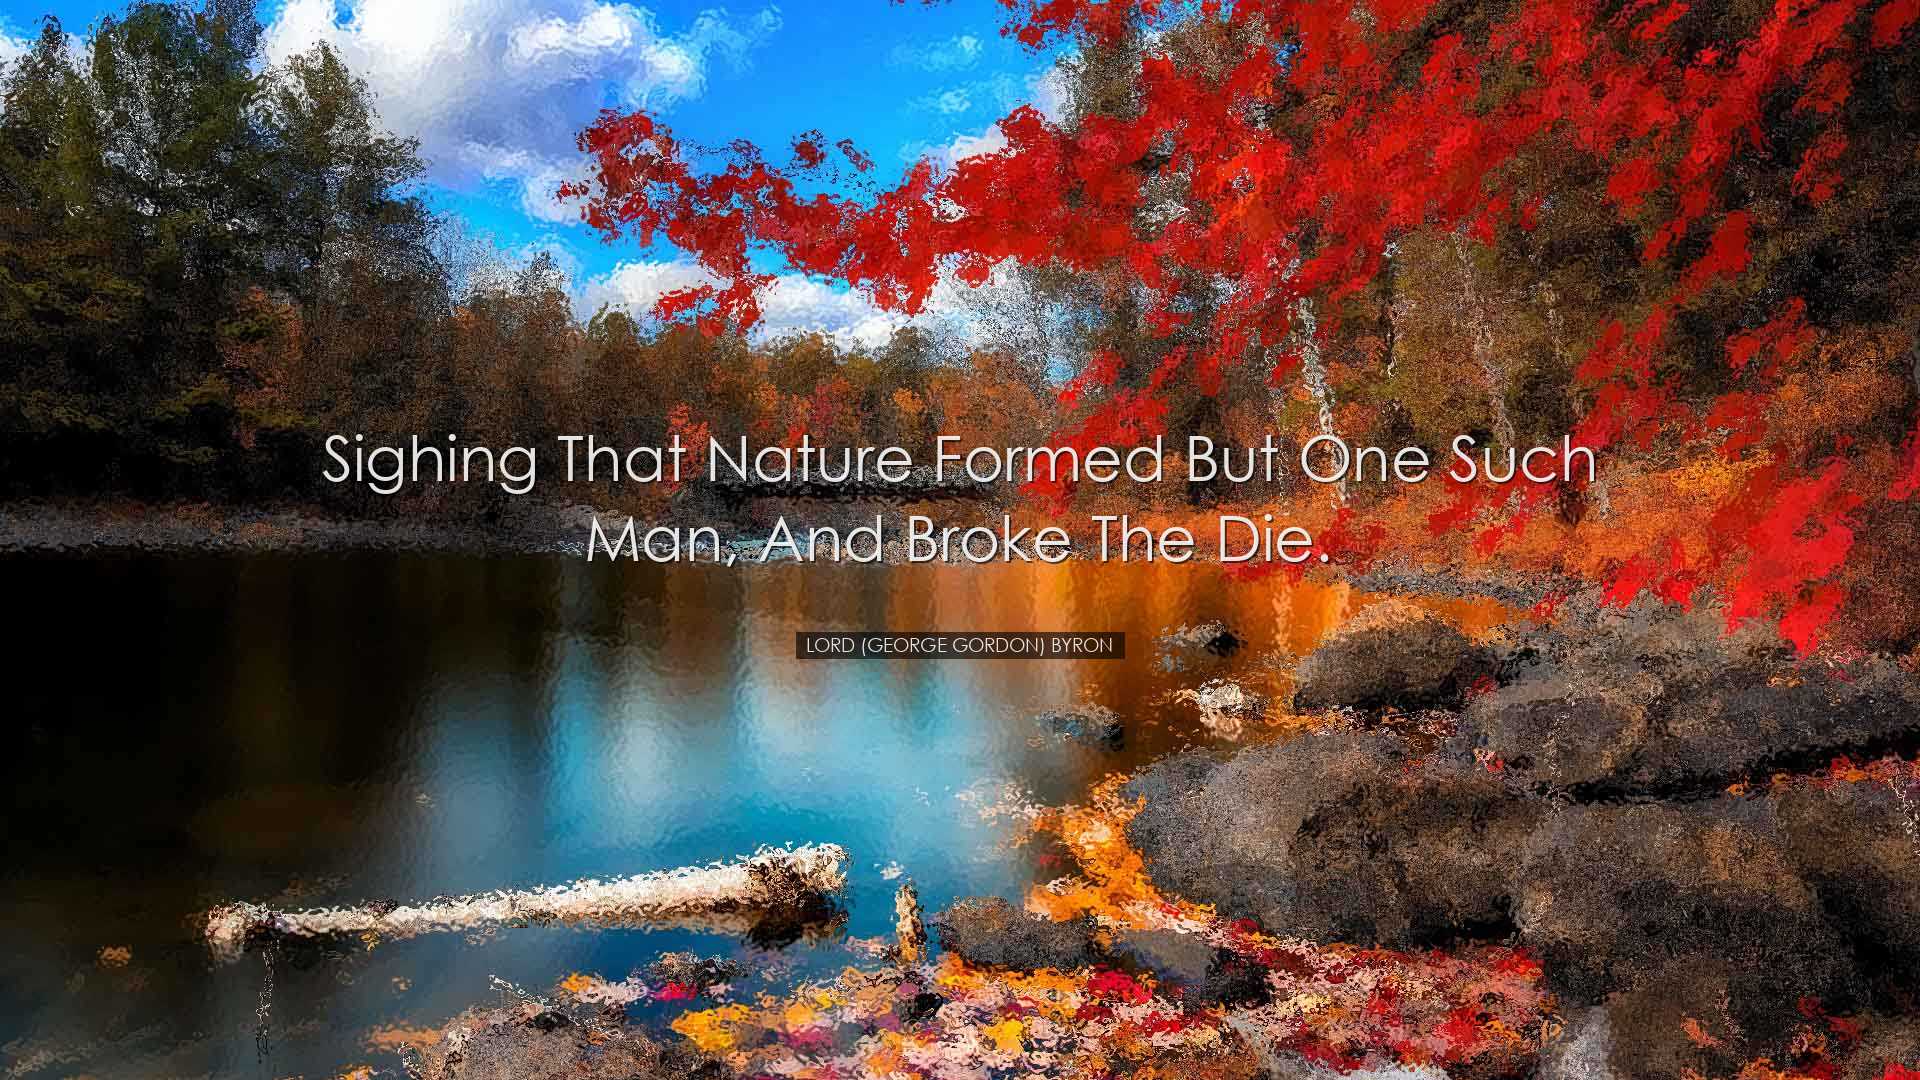 Sighing that Nature formed but one such man, and broke the die. -